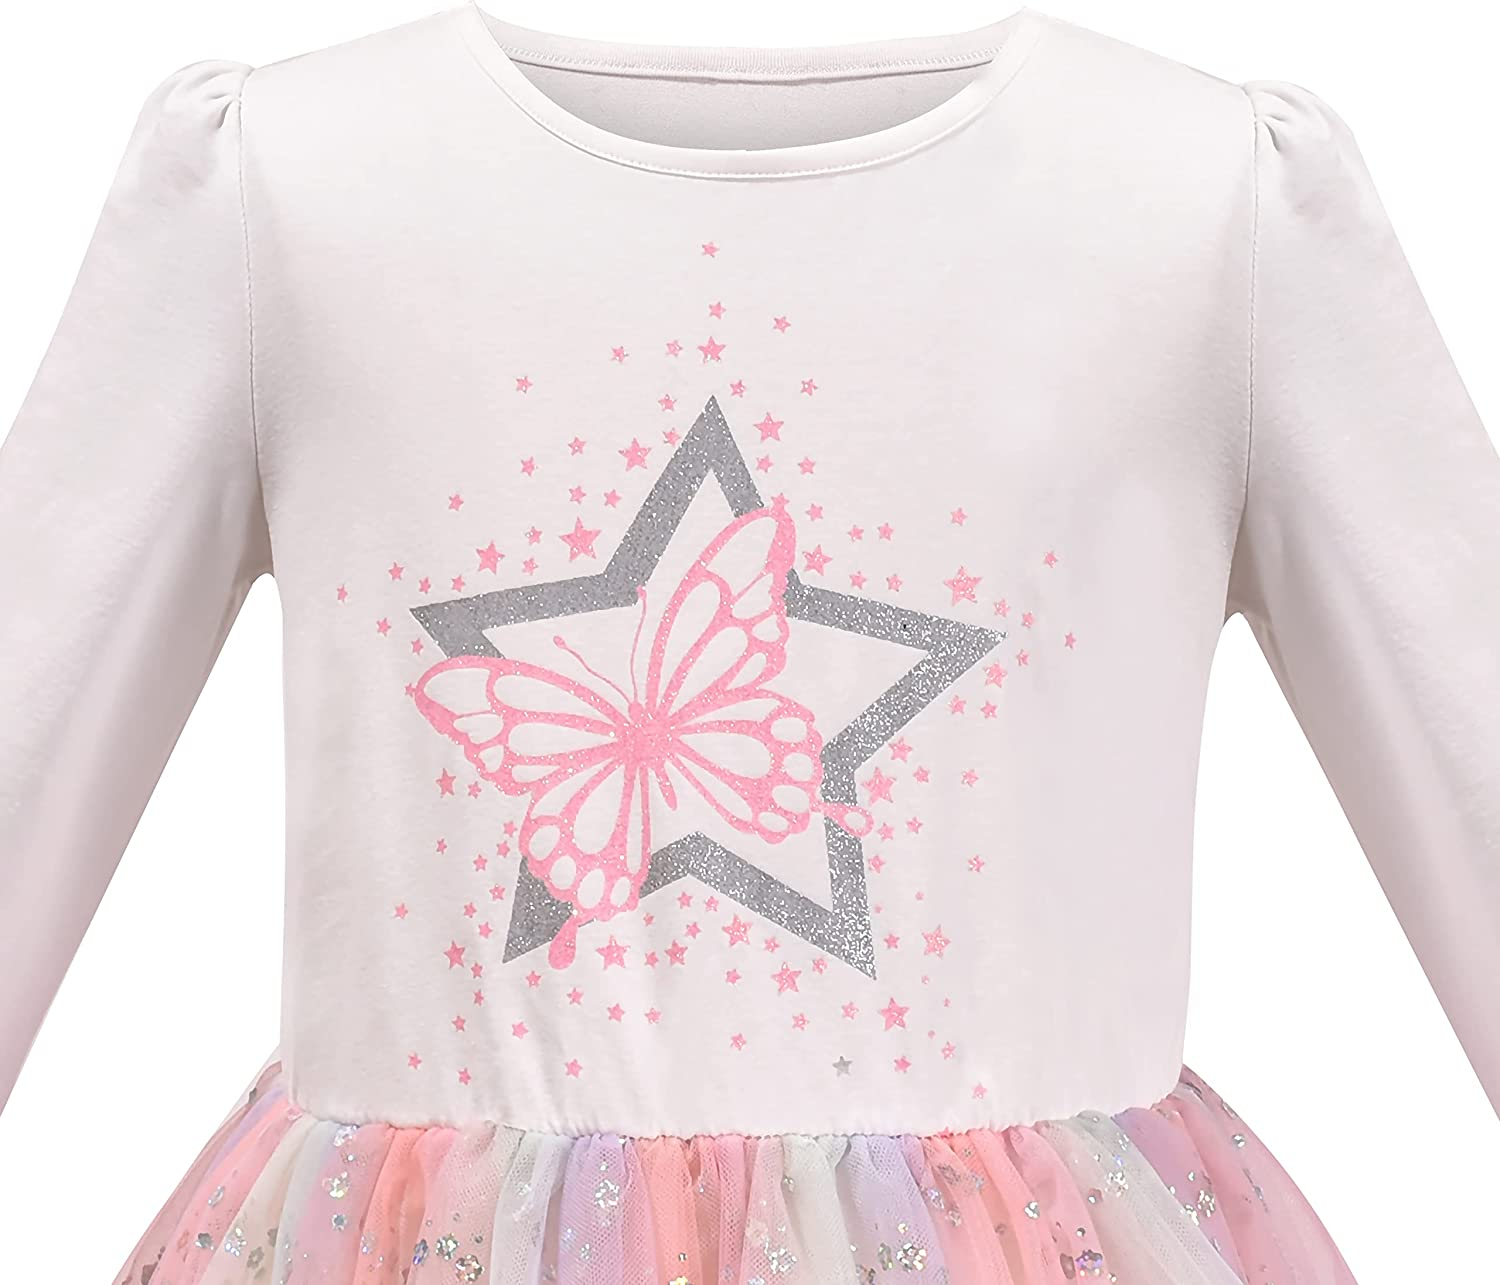 Girls Long Sleeve Christmas Dress with Owl and Sequin Design Cotton Top with Tulle Skirt, Machine Washable